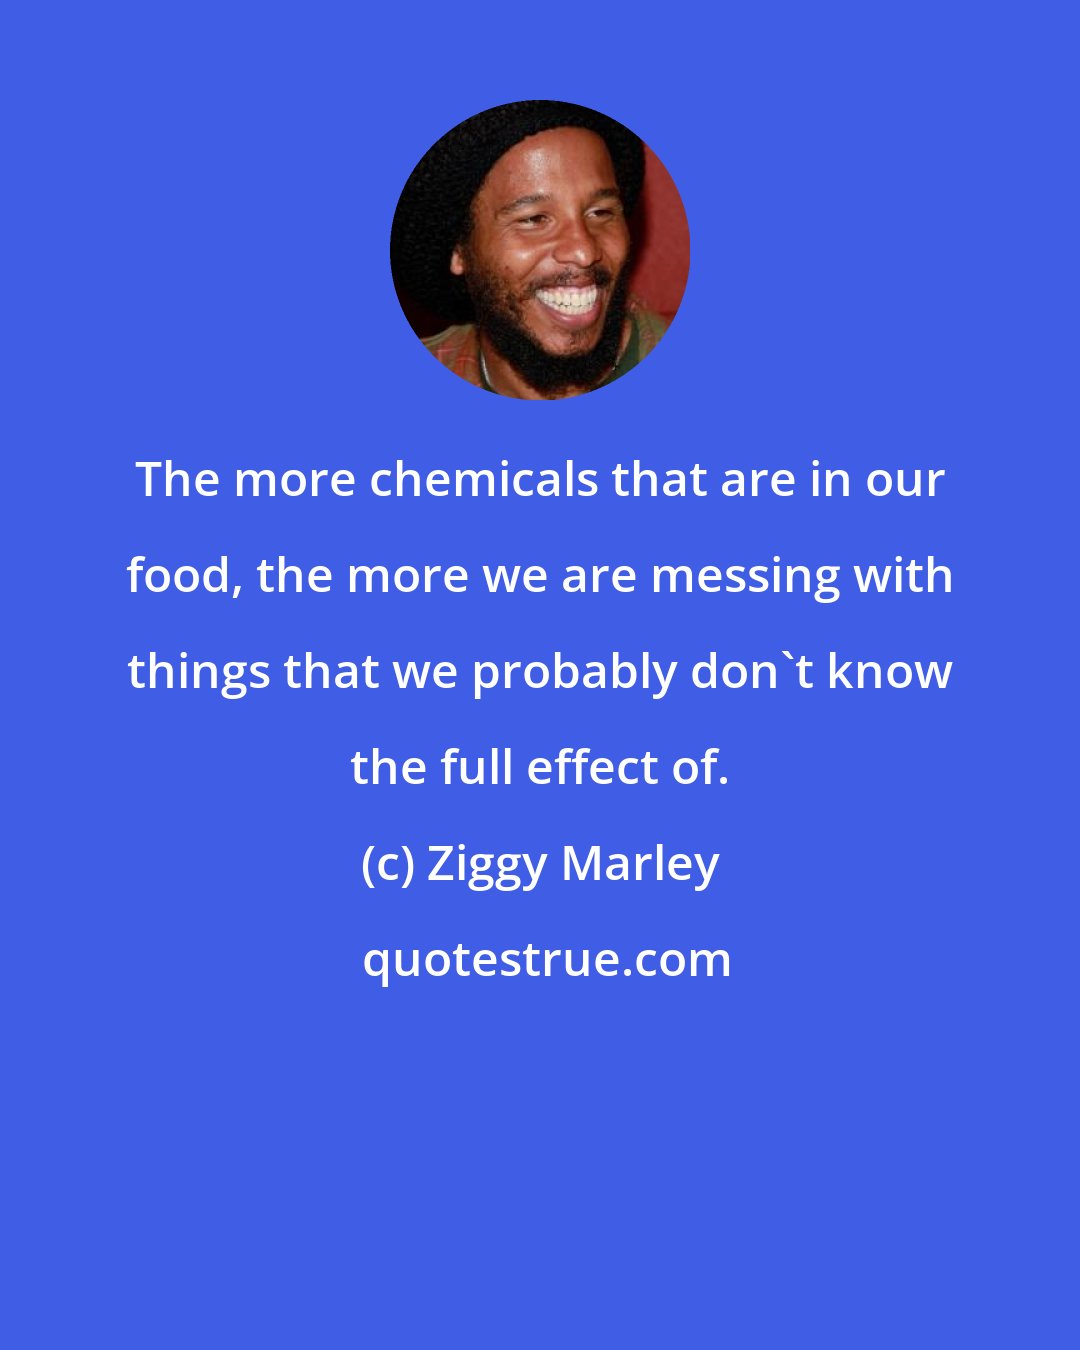 Ziggy Marley: The more chemicals that are in our food, the more we are messing with things that we probably don't know the full effect of.